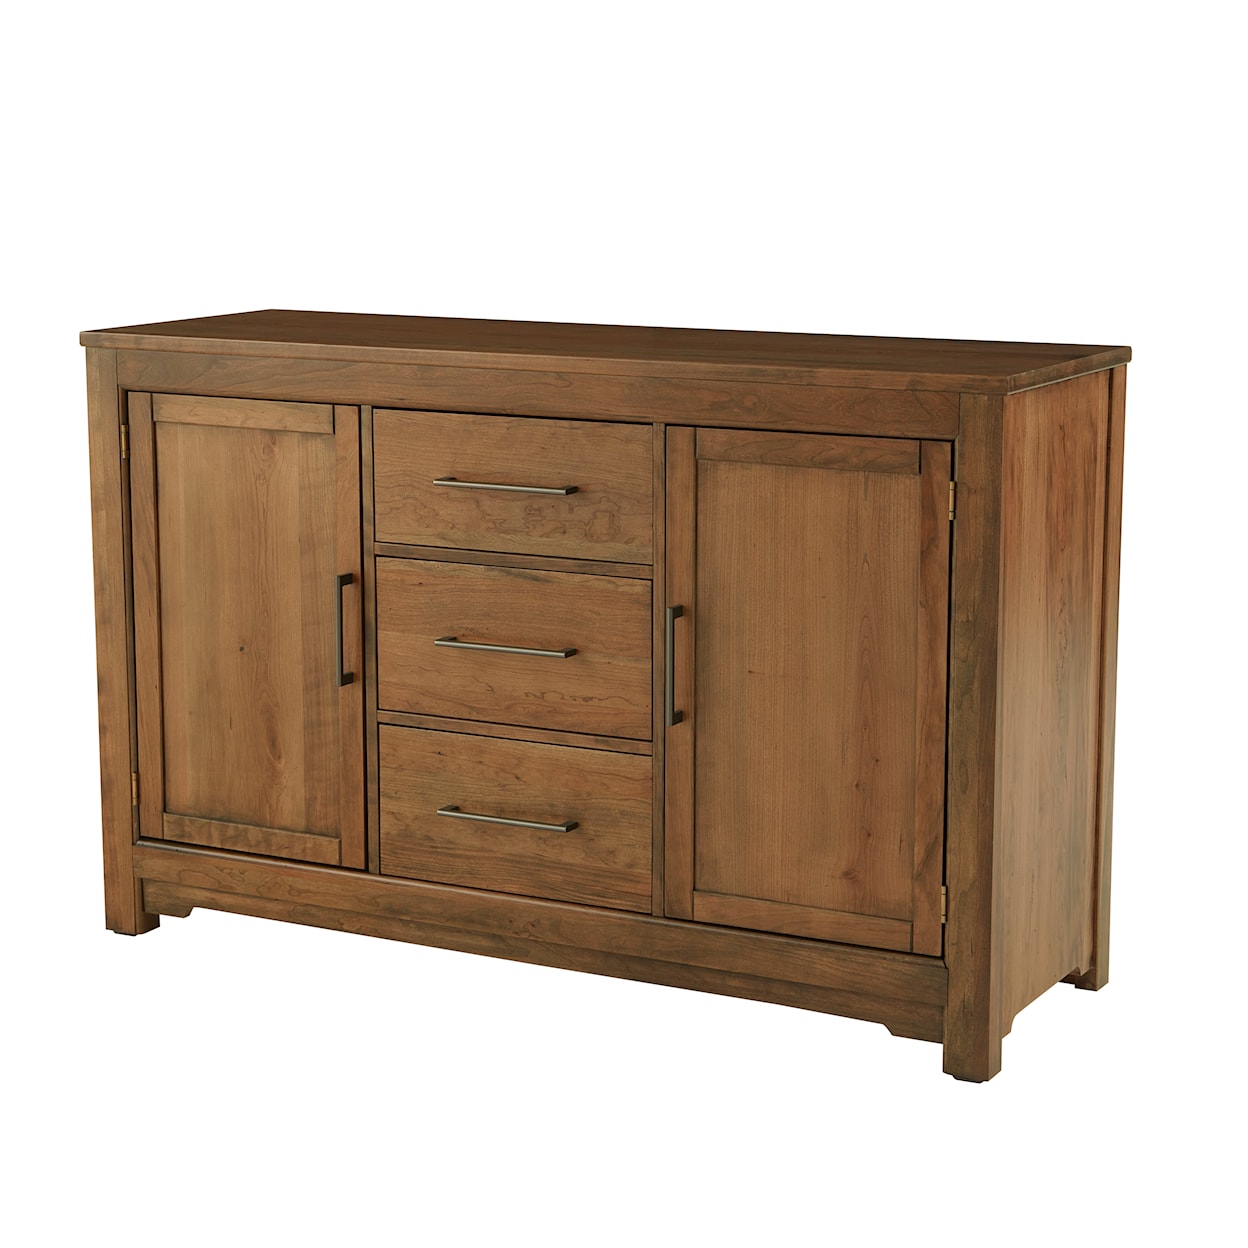 Artisan & Post Crafted Cherry Dining Room Server